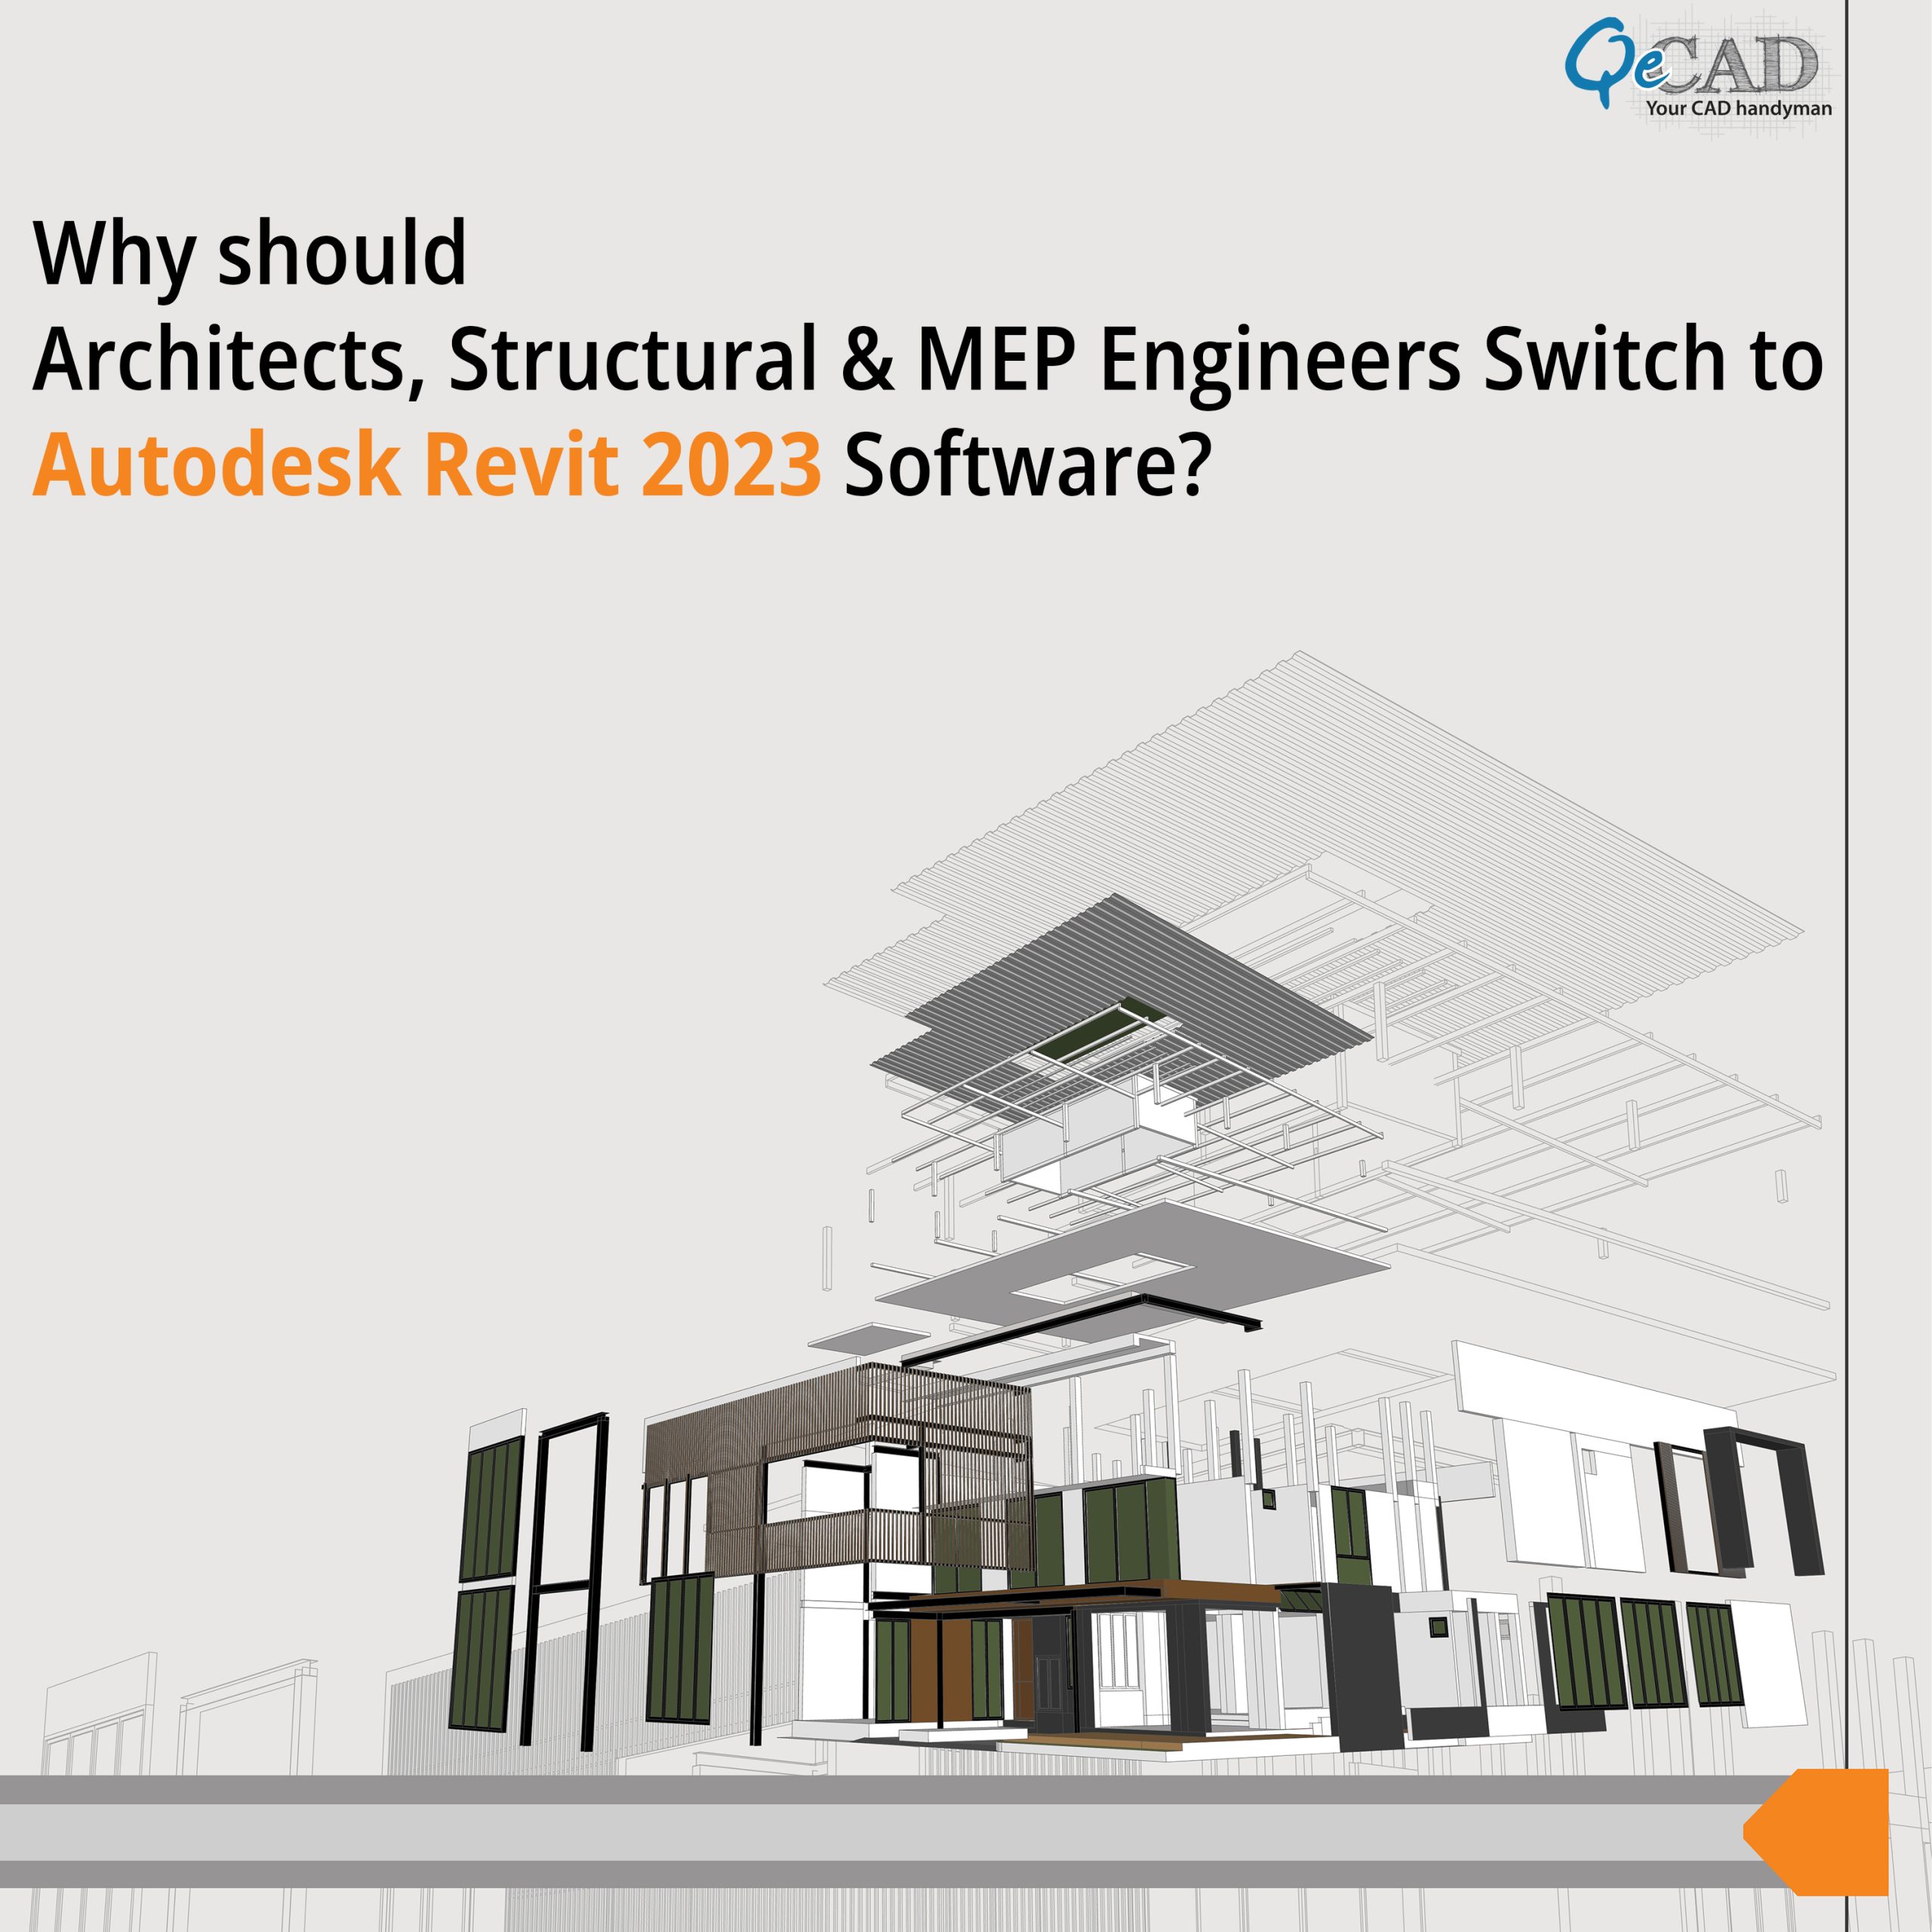 Why should Architects, Structural & MEP Engineers Switch to Autodesk Revit 2023 Software?